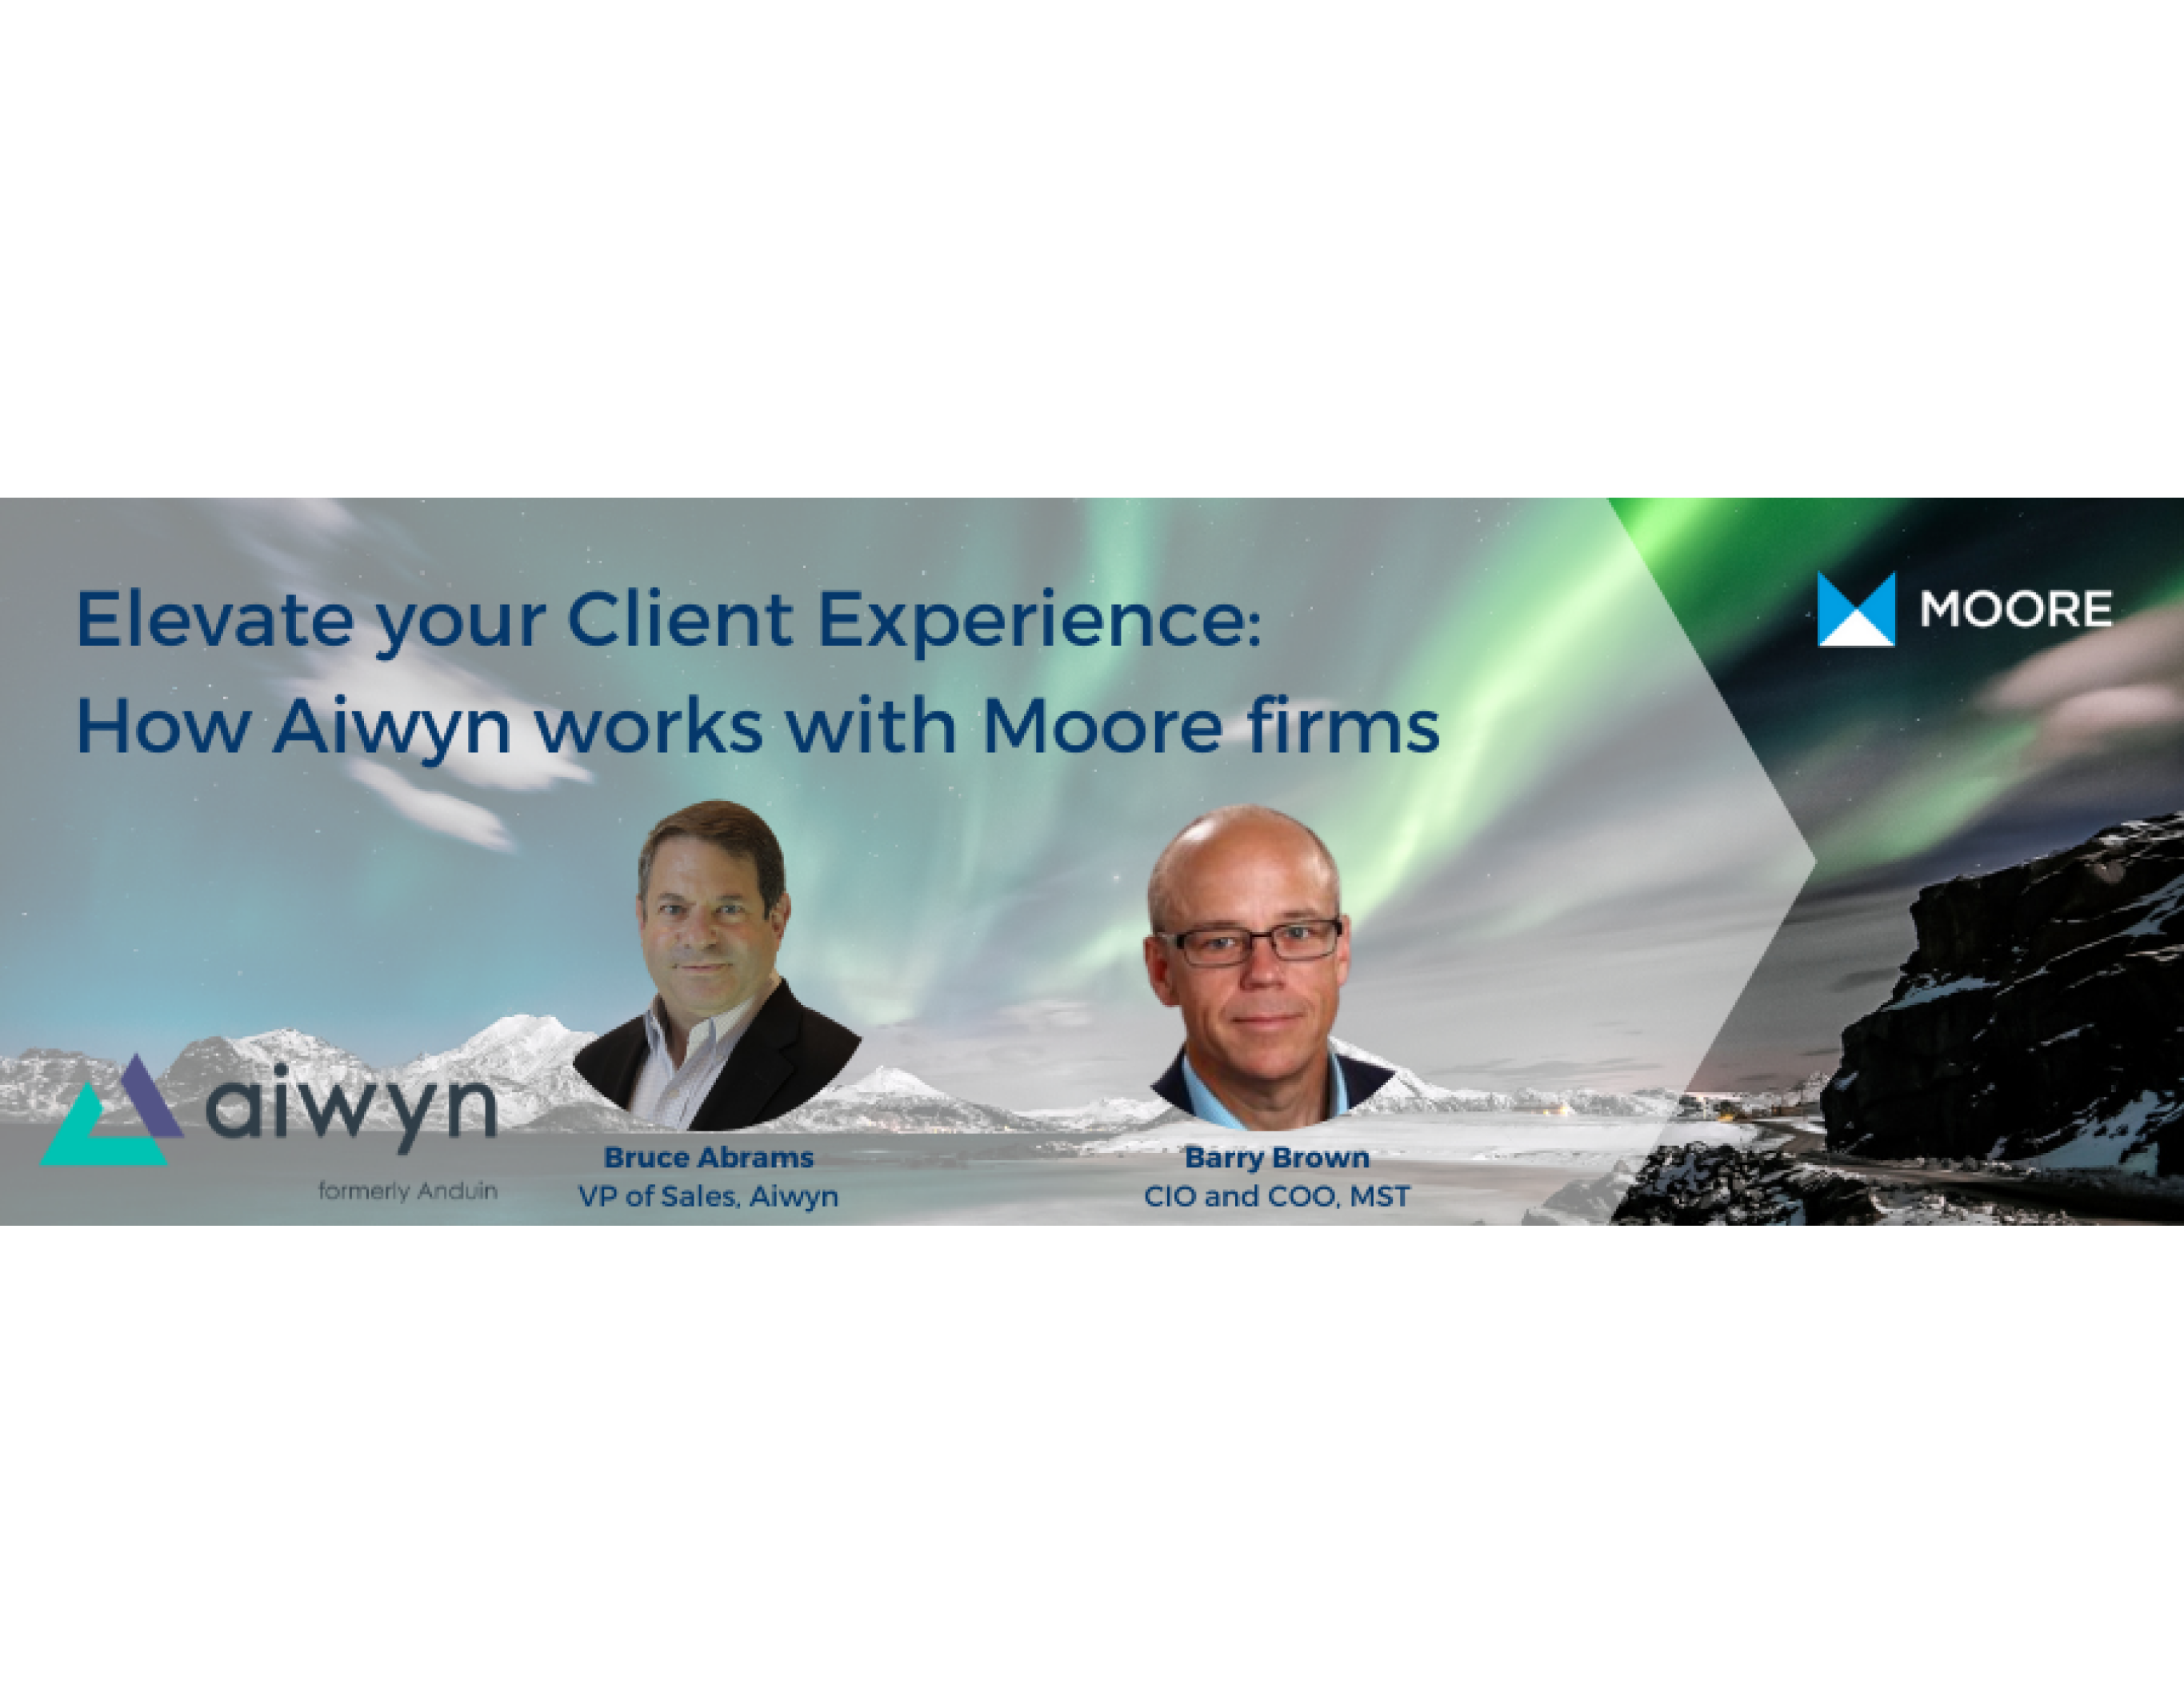 Elevate your client experience